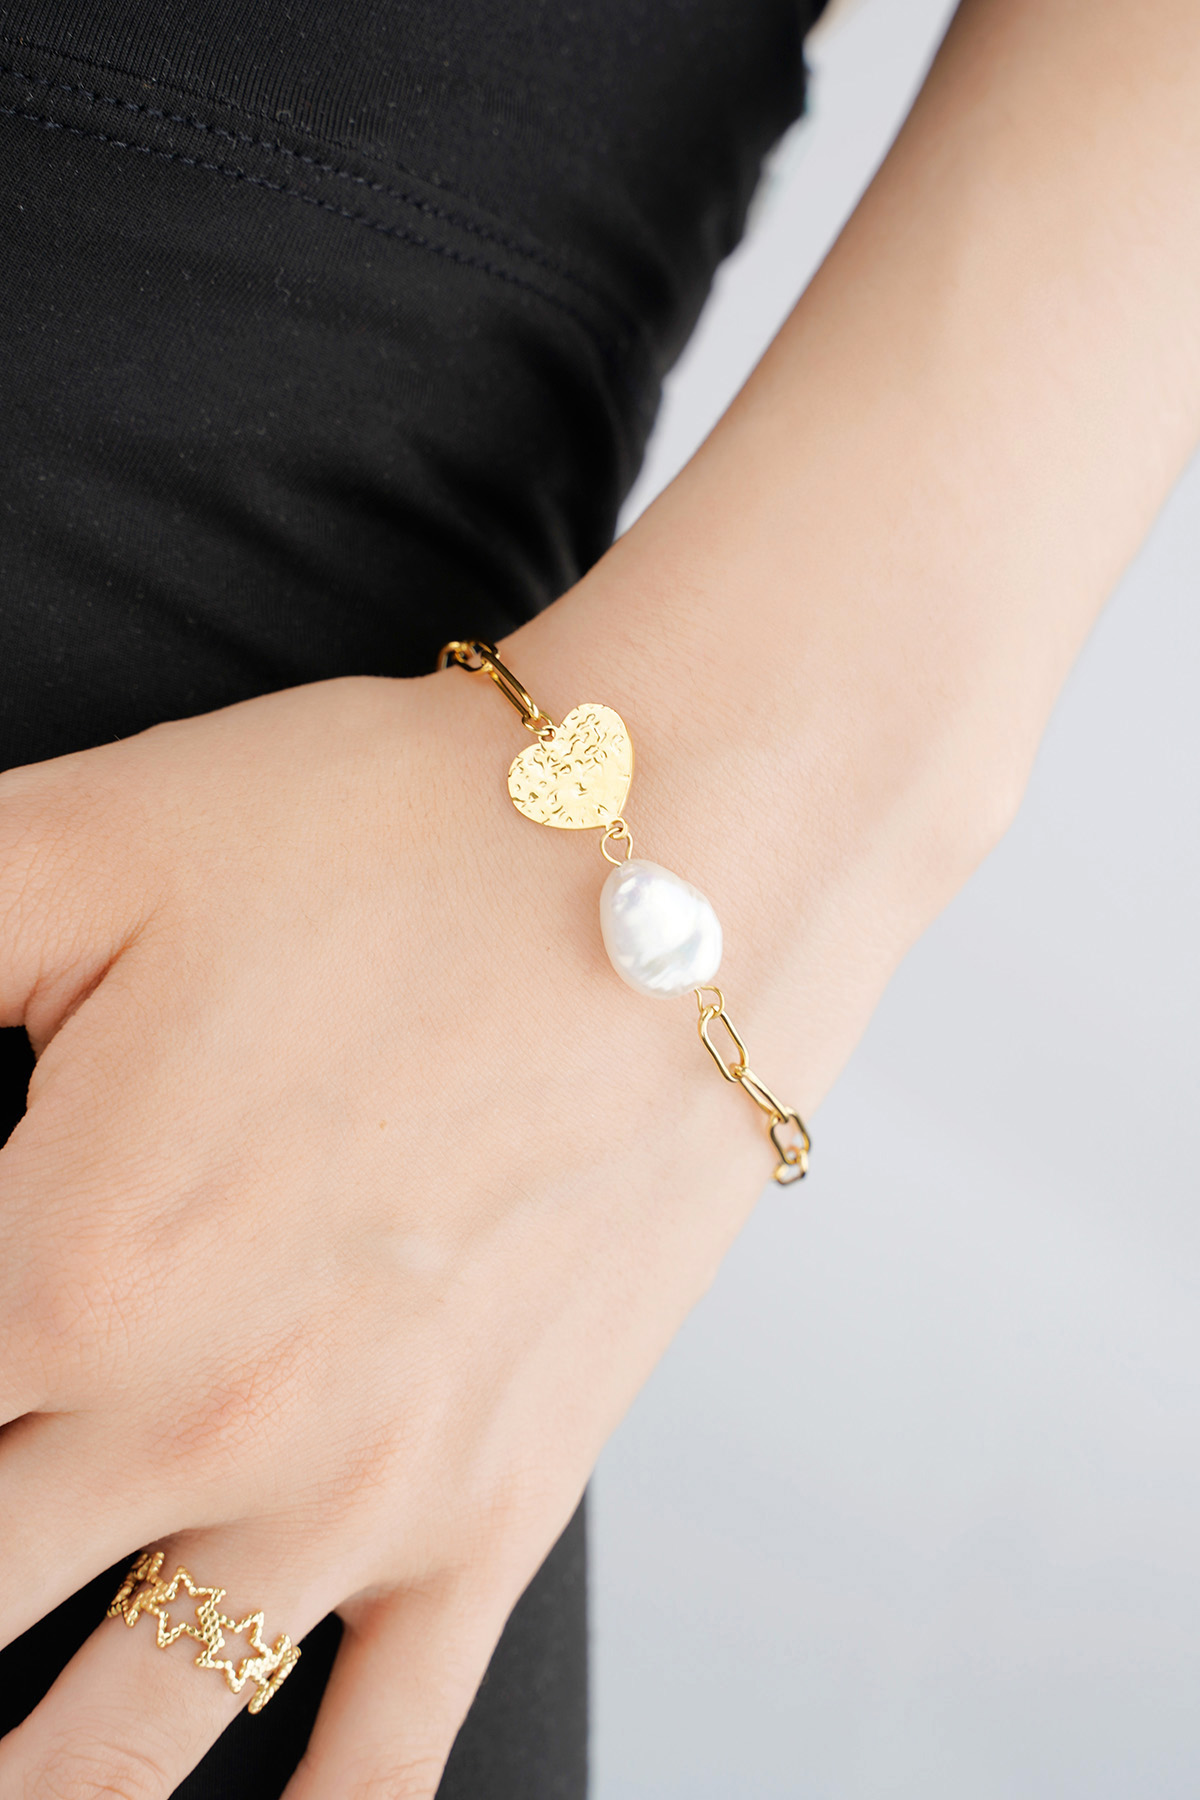 Bracelet amour toujours - or h5 Image3